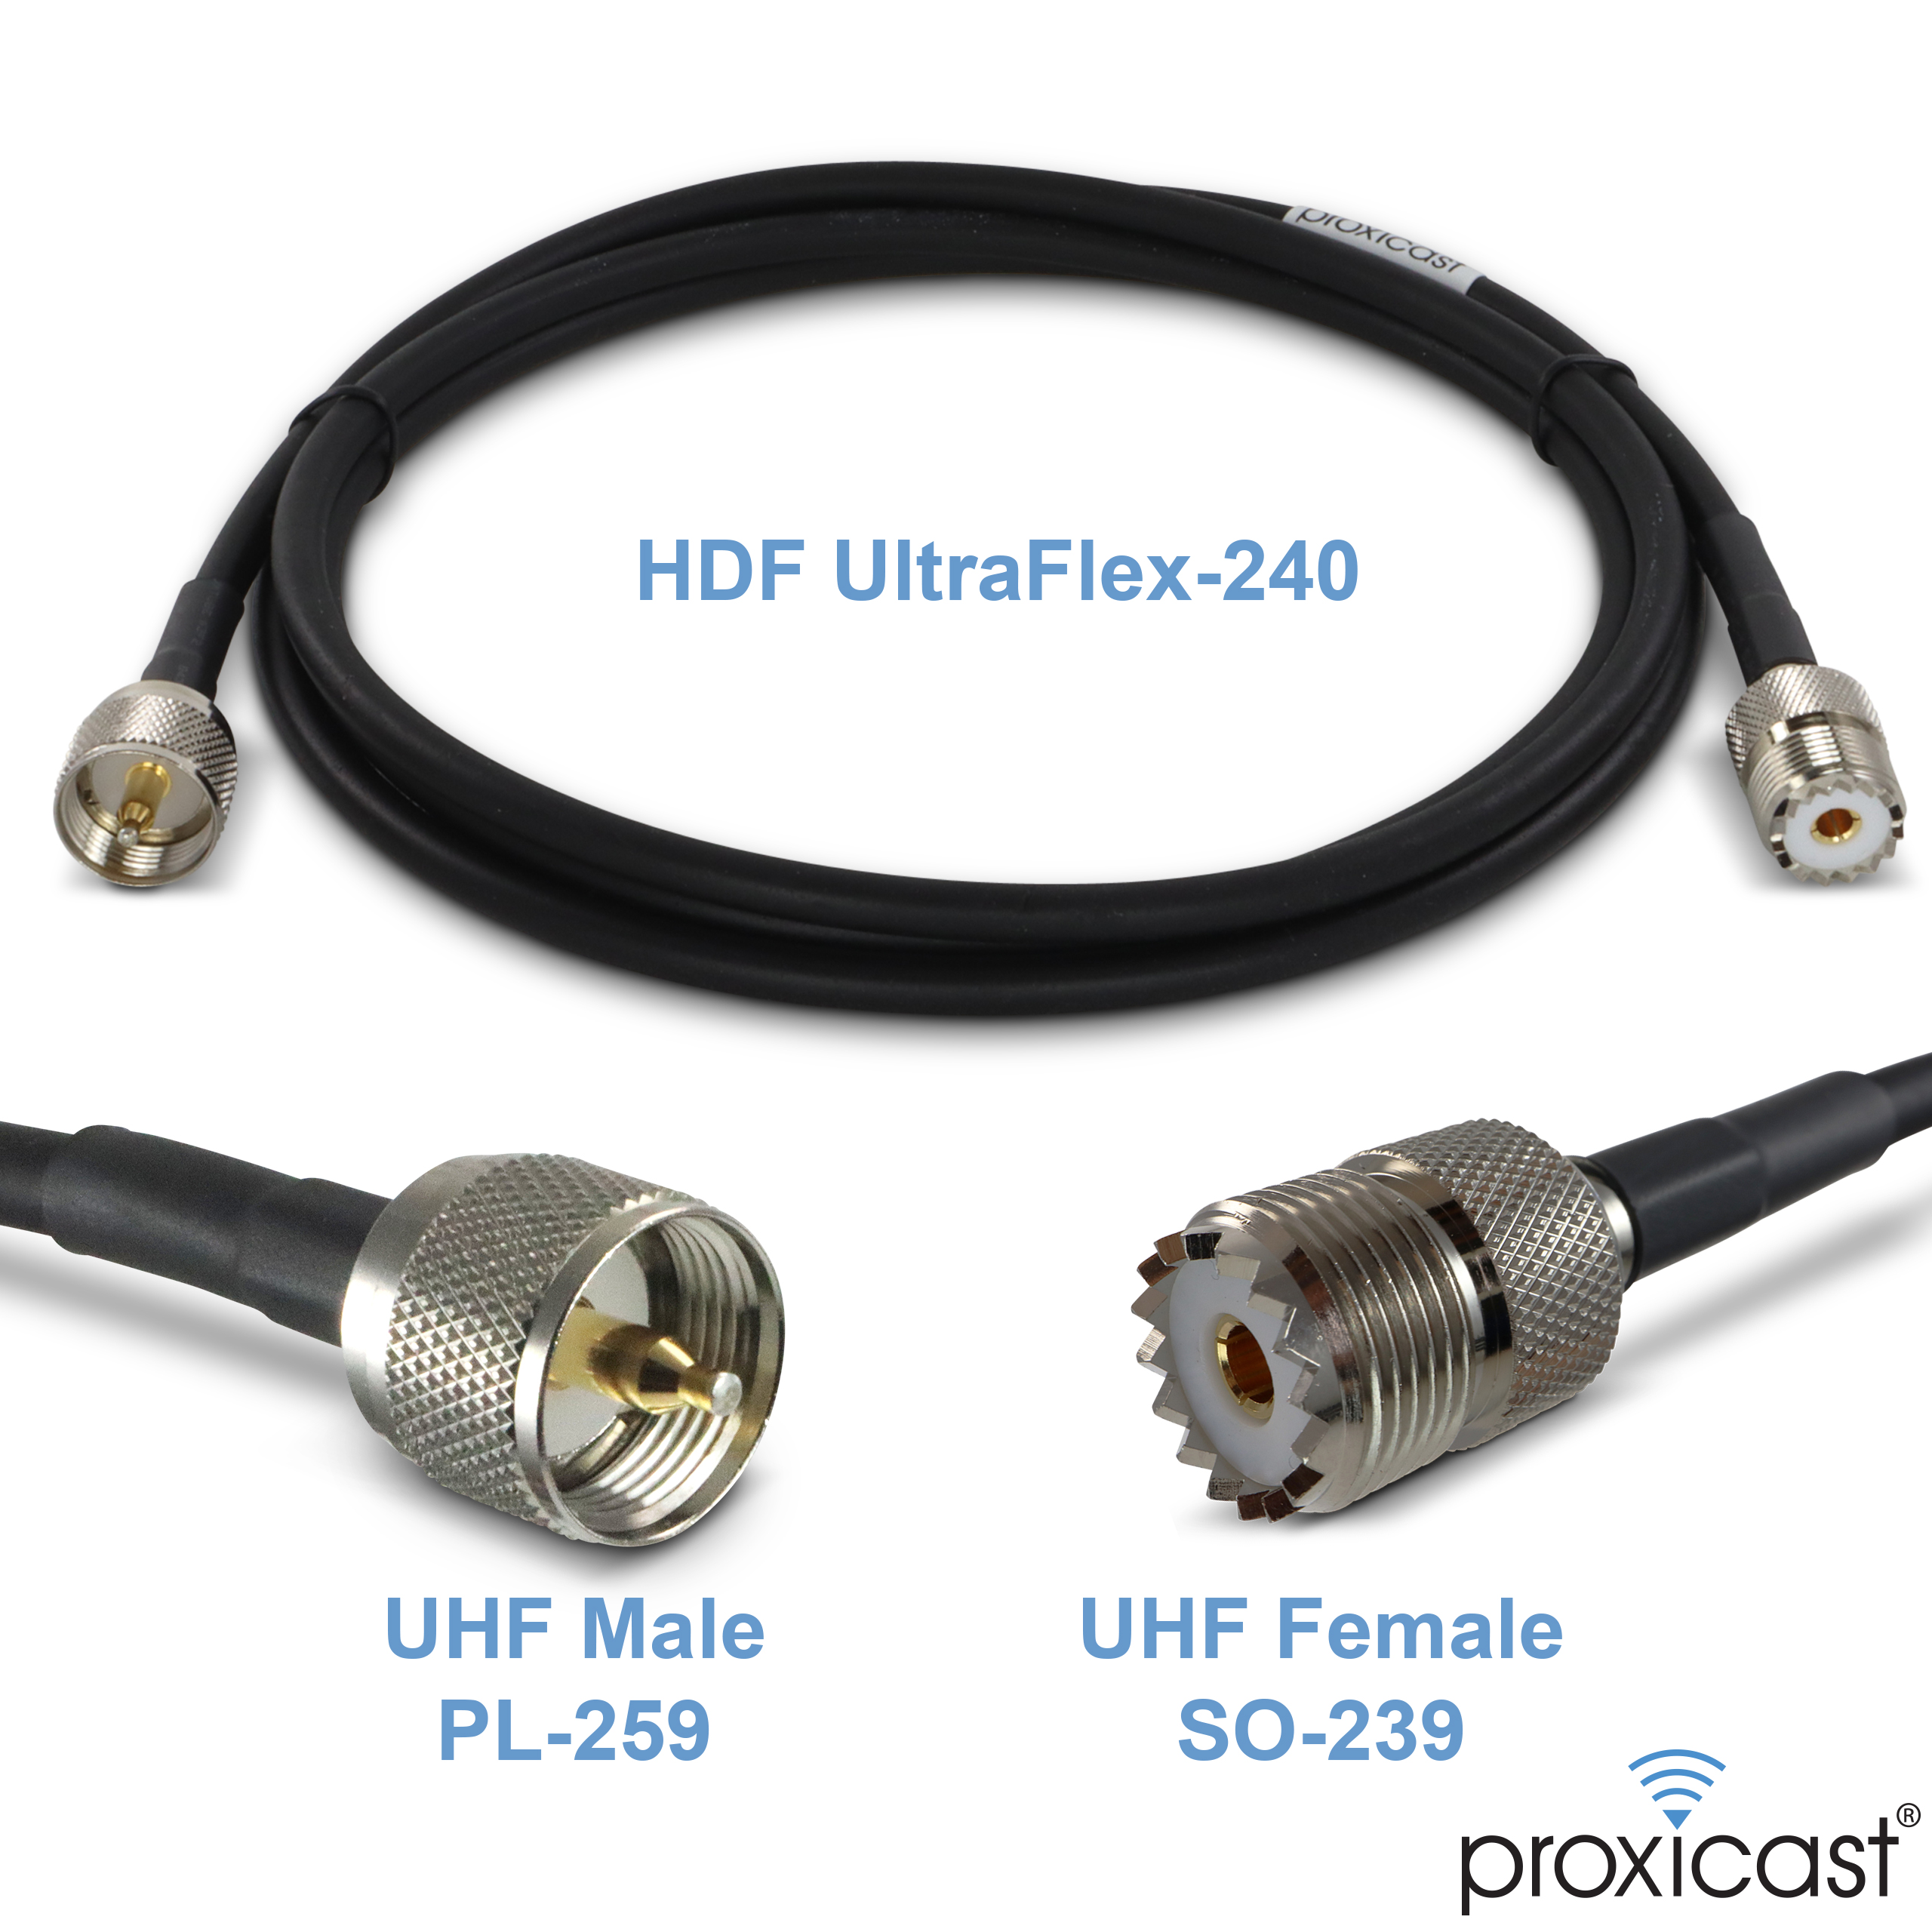 32.8FT Low Loss UHF PL-259 Male to Male YD-400 RG-8X Coaxial Cable RG8X PL259 Best RG58 RF Transmission Line Microwave for Ham or CB Radio VHF HF Radio Antenna 